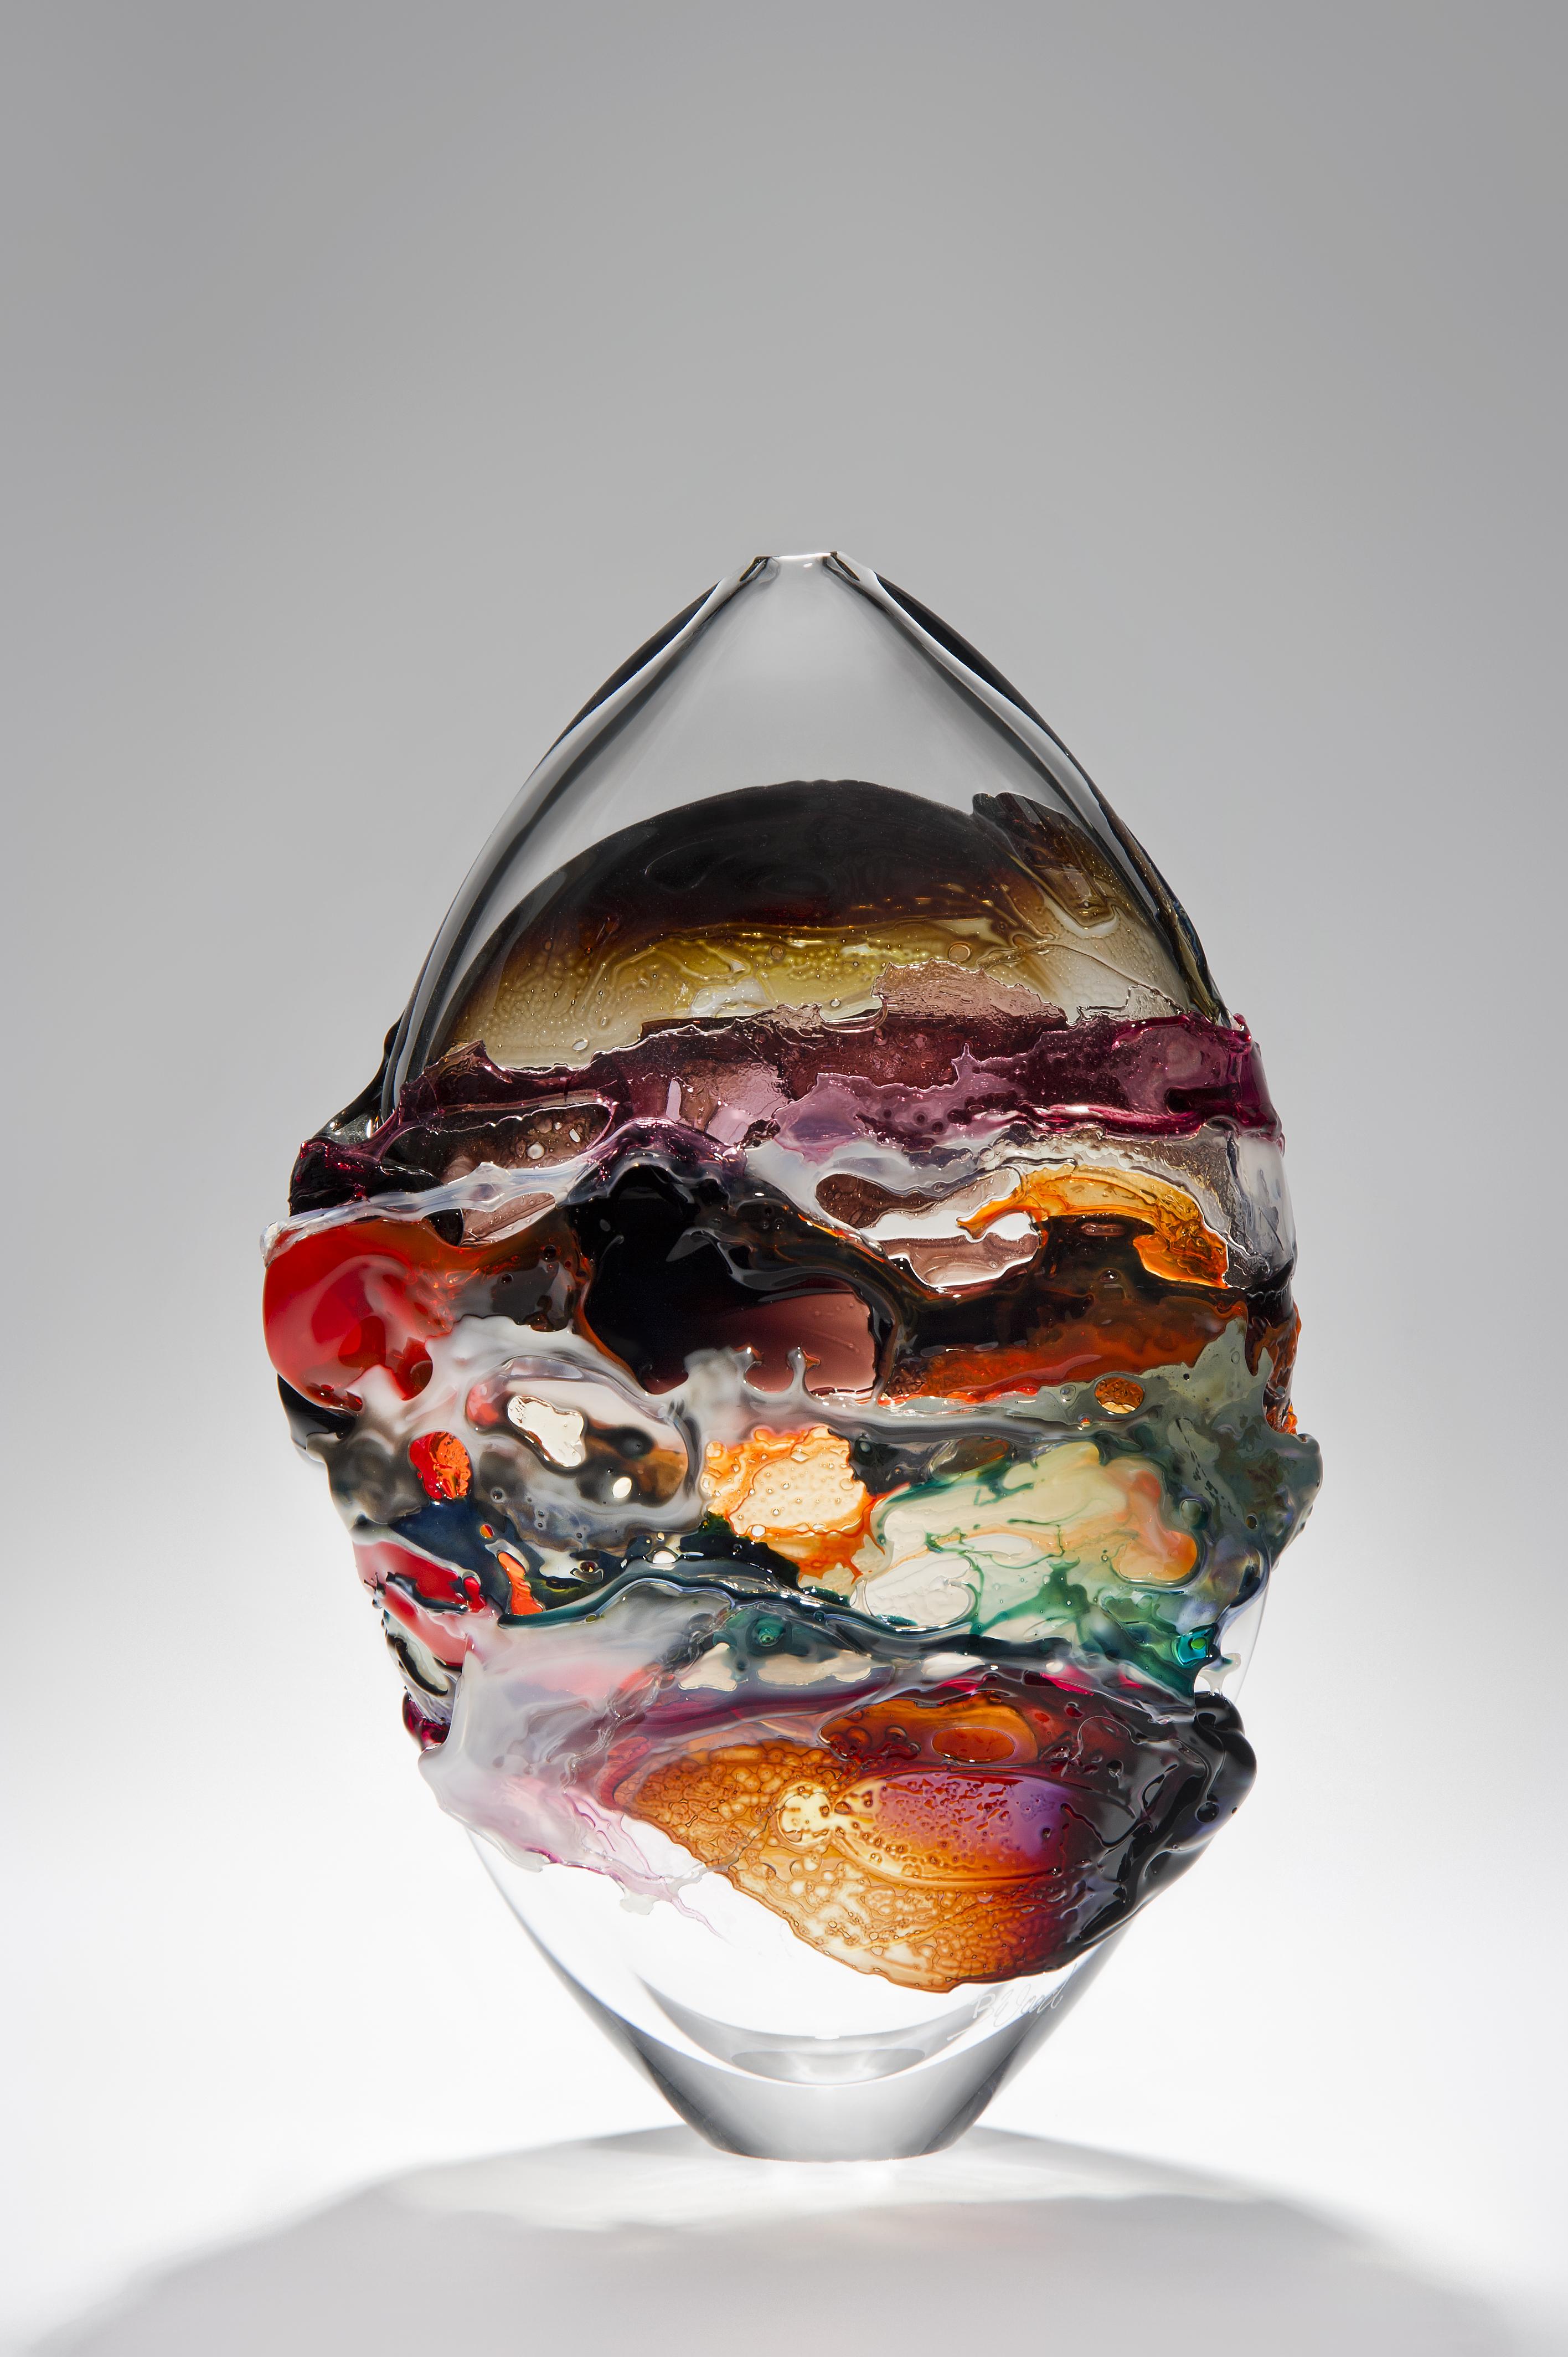 Naples II is a unique orange, brown and mixed colored glass vase from the Molten Landscapes collection by the British artist Bethany Wood. An equal passion for painting physically inspires how she controls and manipulates her glass. Recreating the